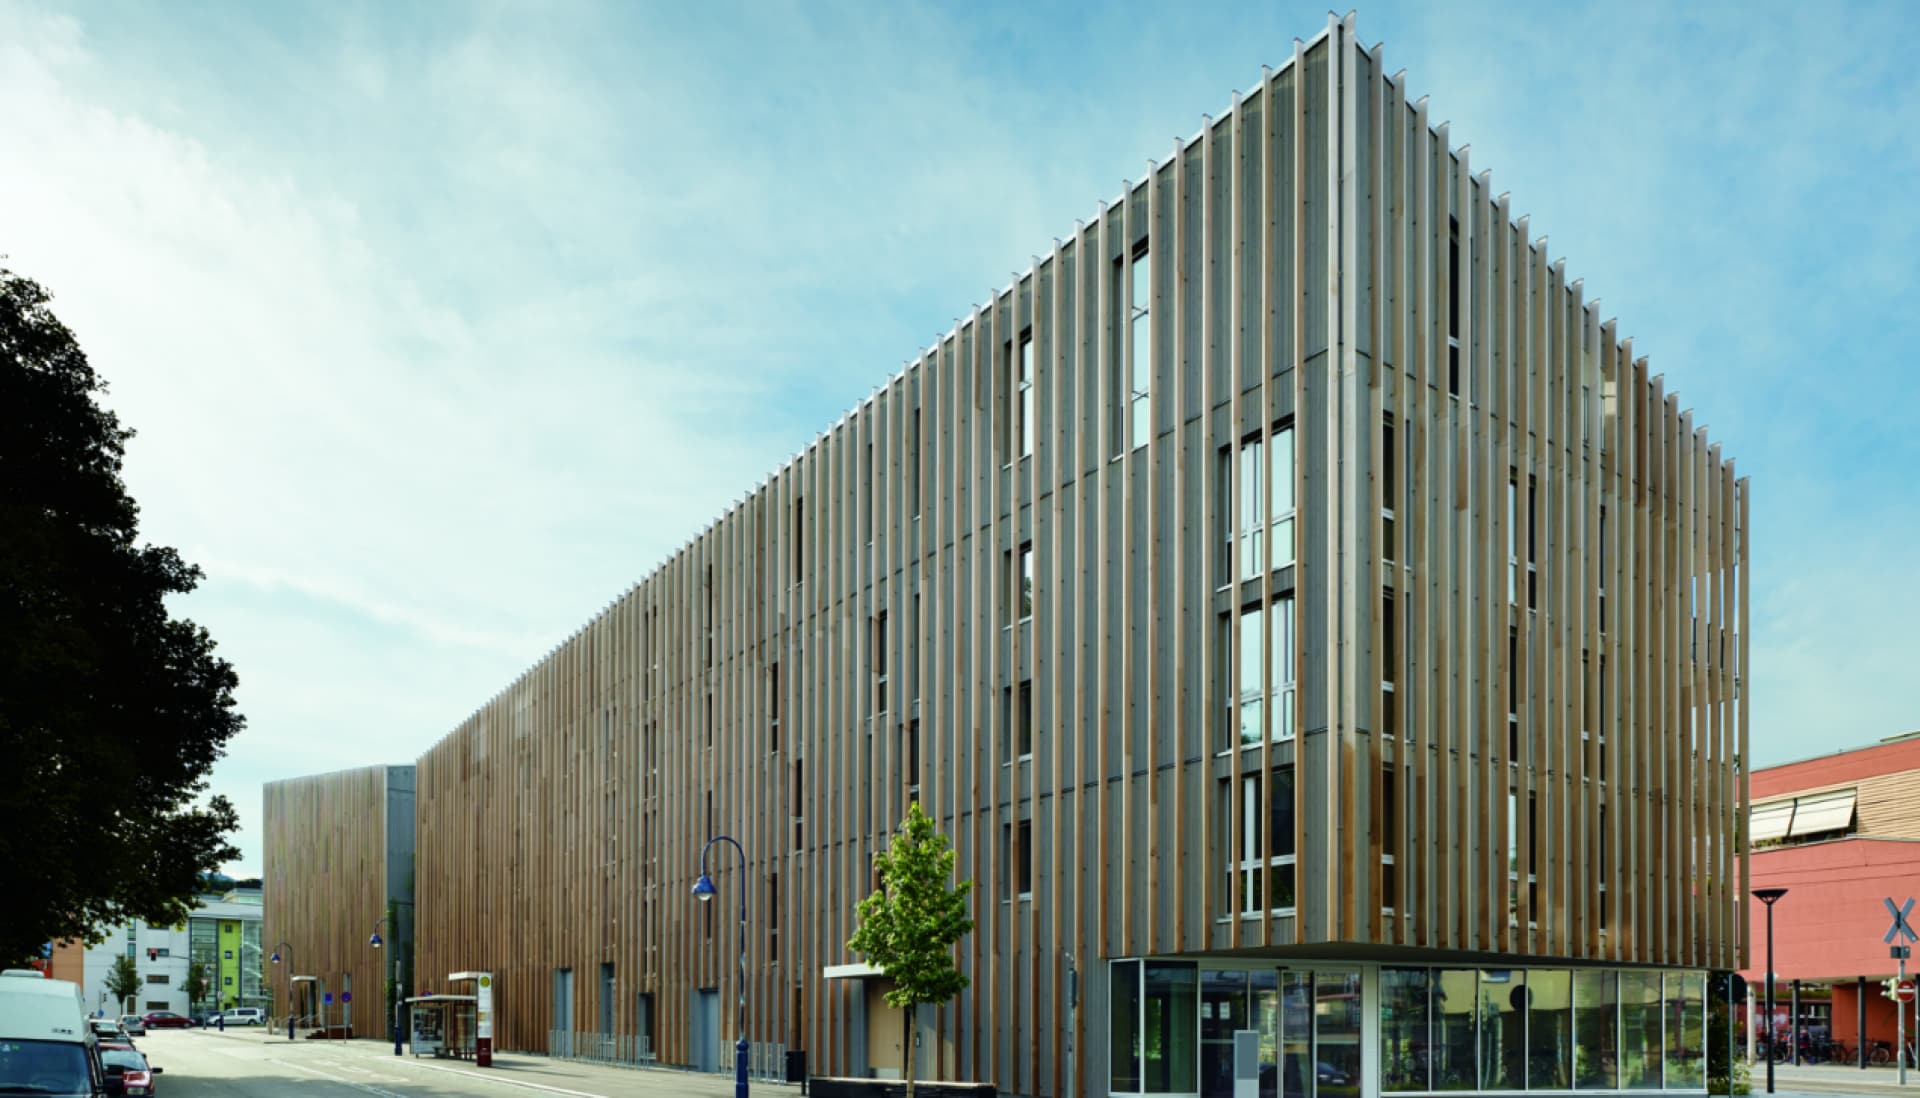 Image of a mixed use building with a wood facade